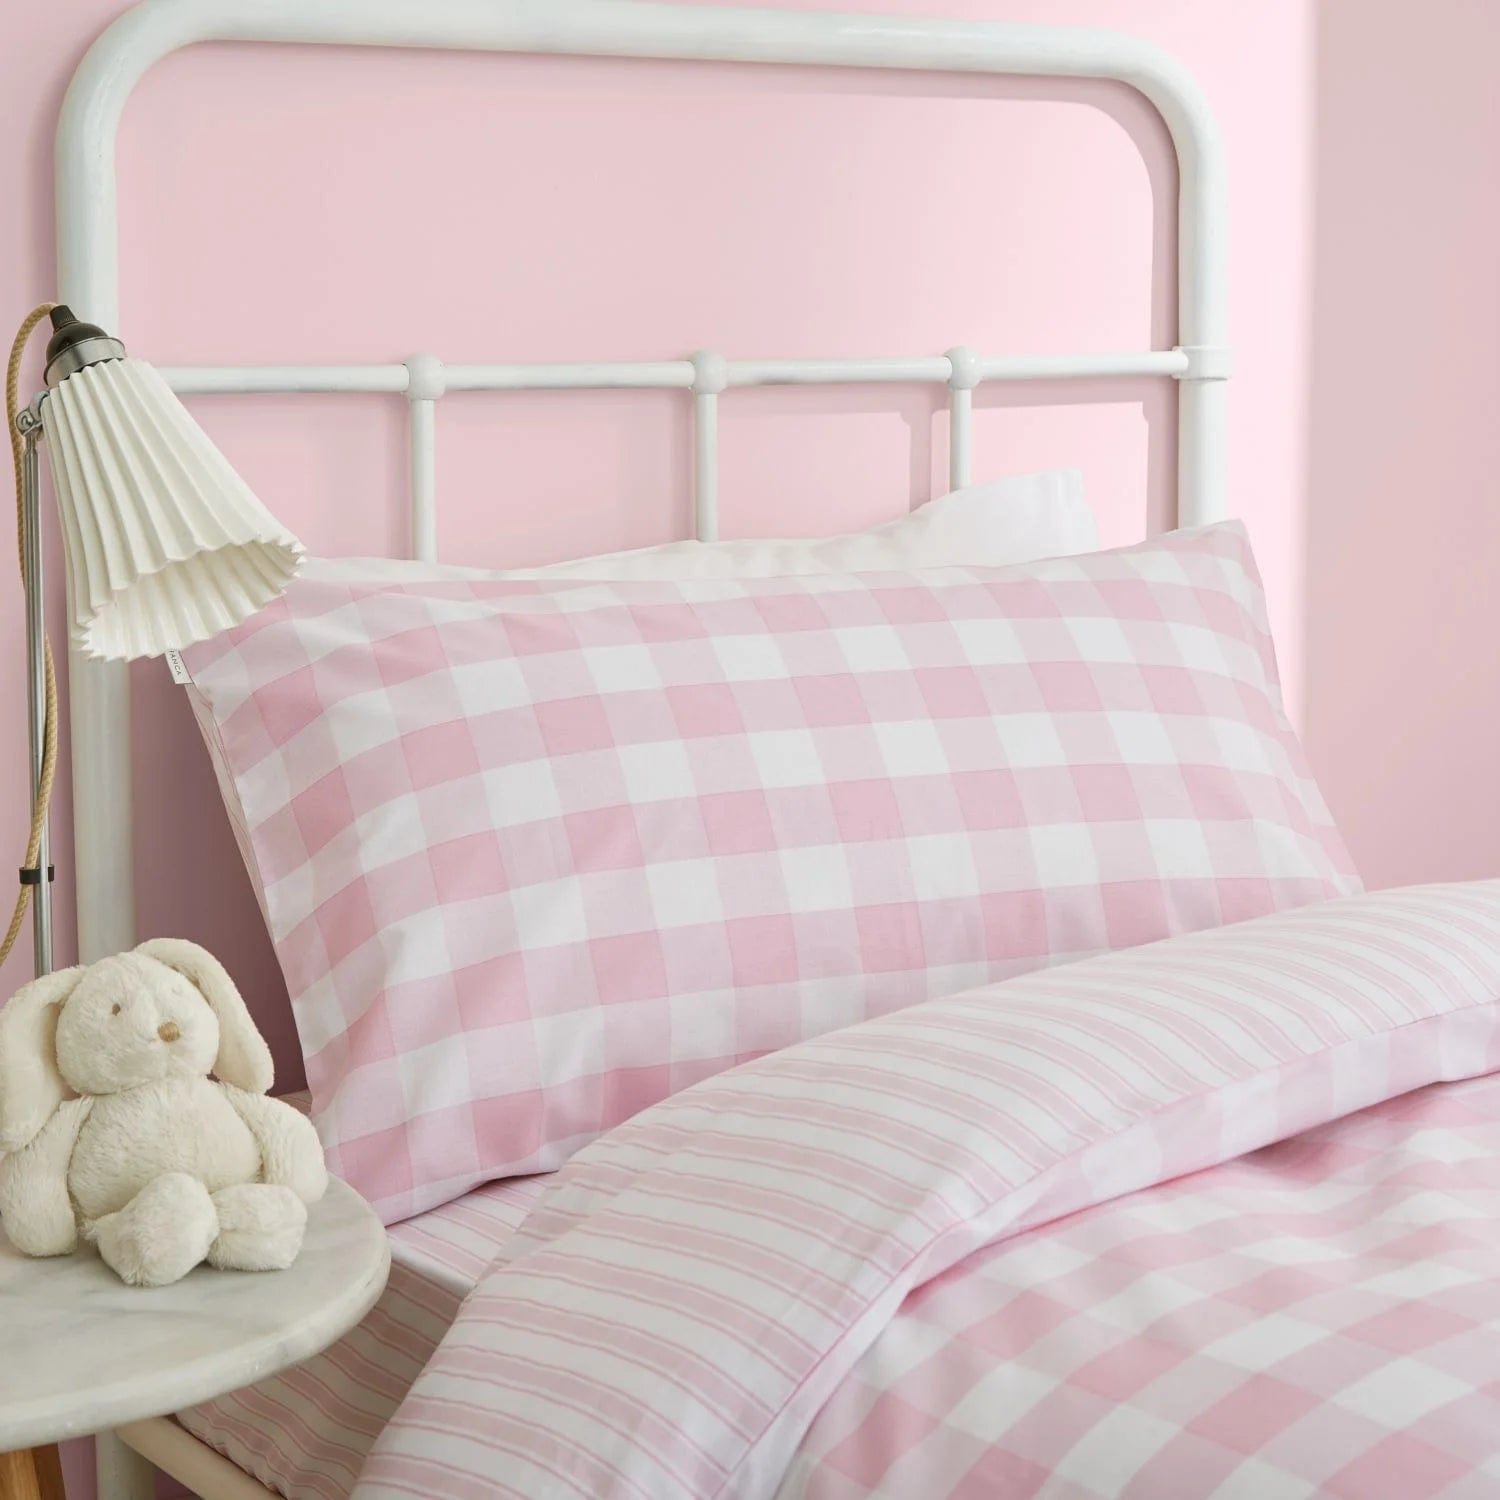 Little Bianca Bedding Check and Stripe Cotton Reversible Duvet Cover Set with Pillowcase Pink